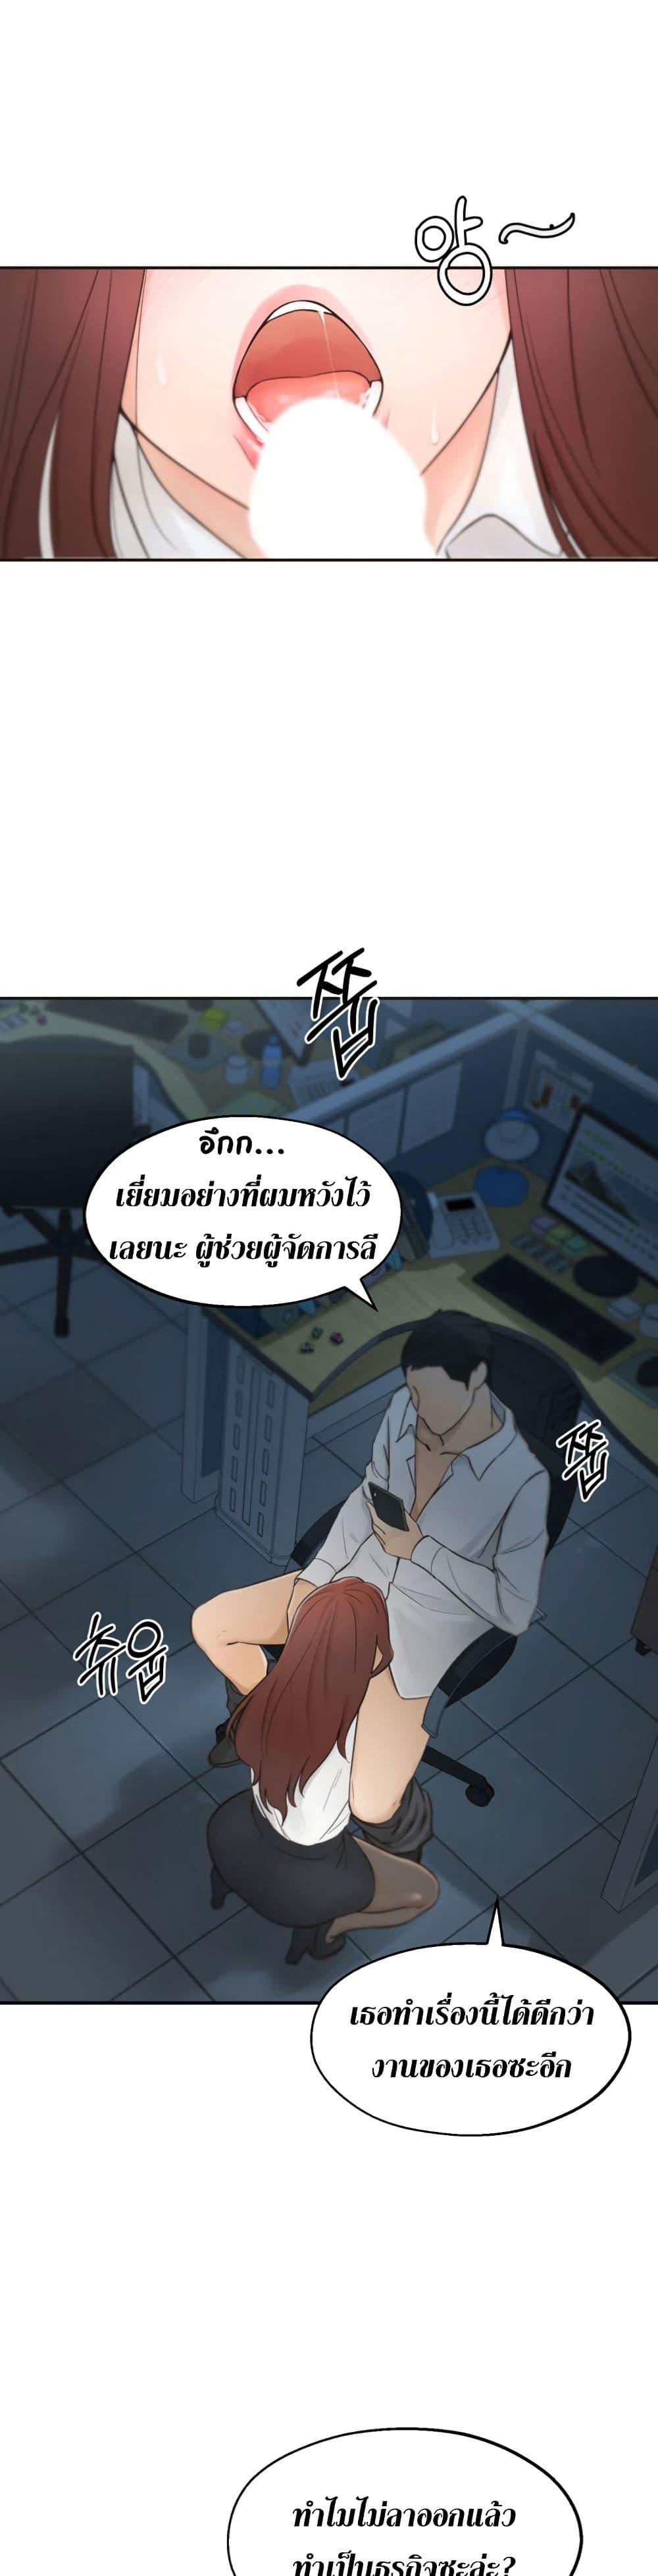 A Knowing Sister 1 ภาพ 3